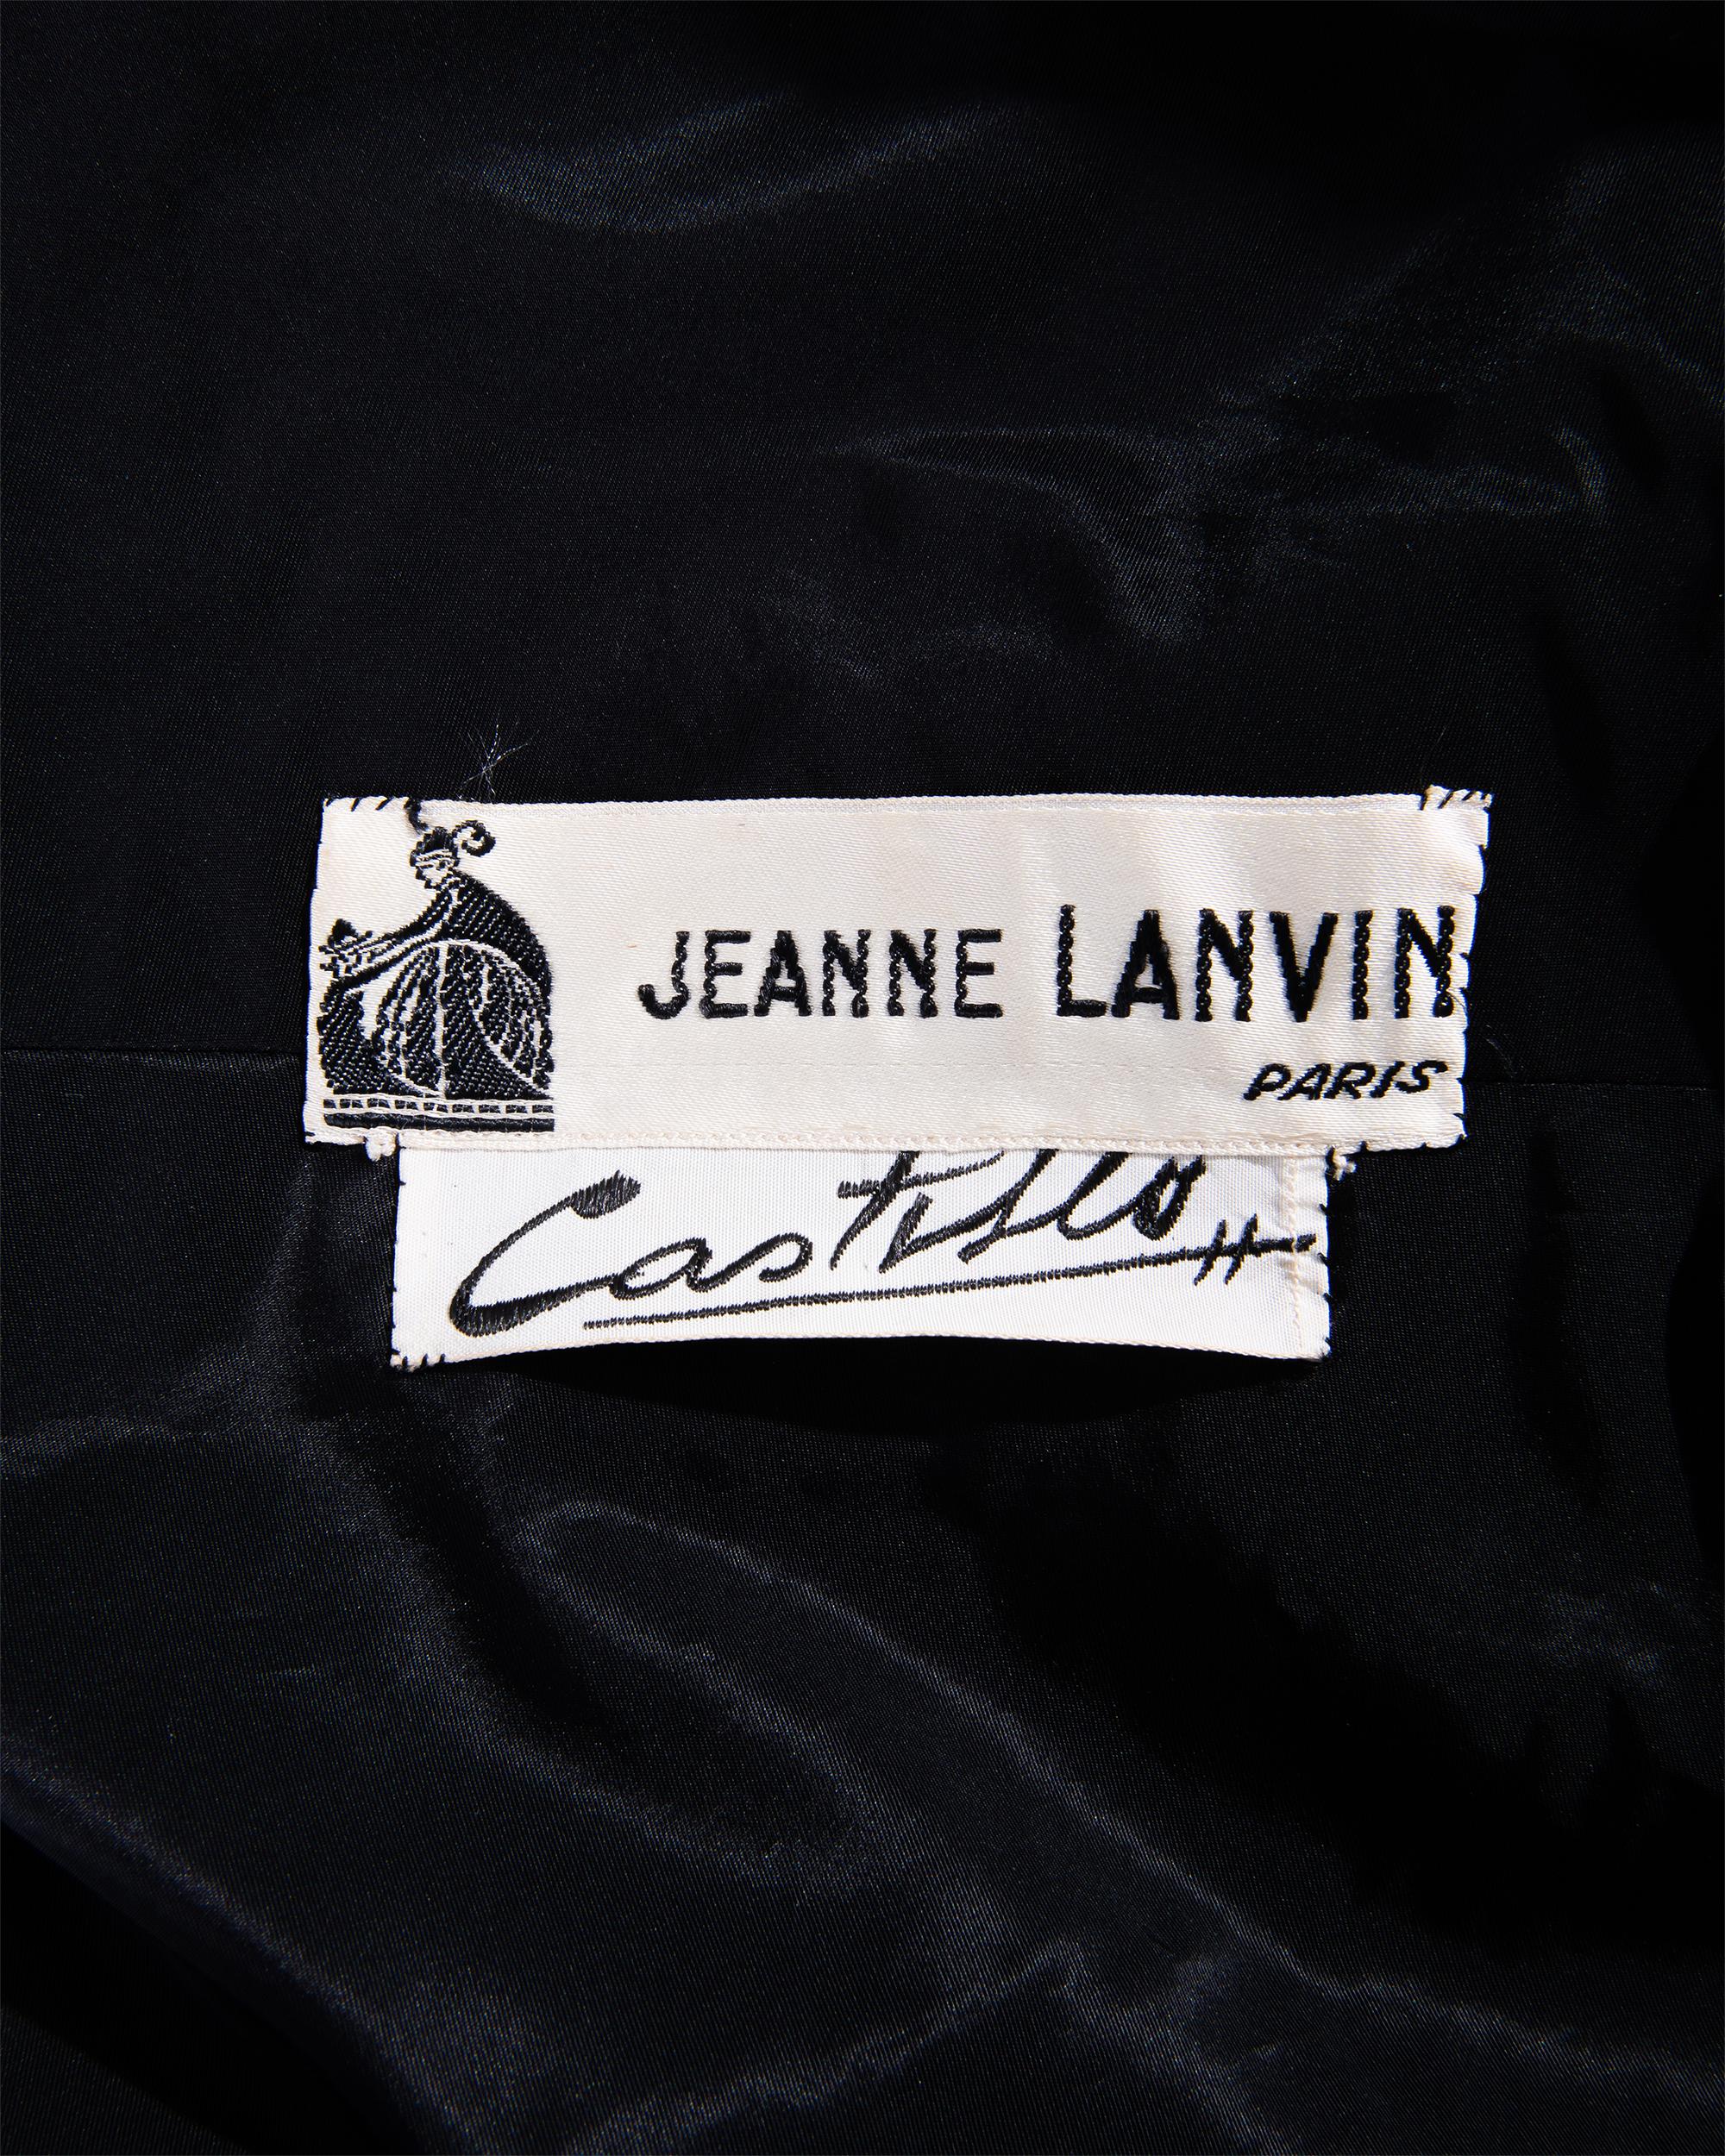 A/W 1956 Jeanne Lanvin Haute Couture Black and Gold Embroidered Velvet Dress For Sale 4